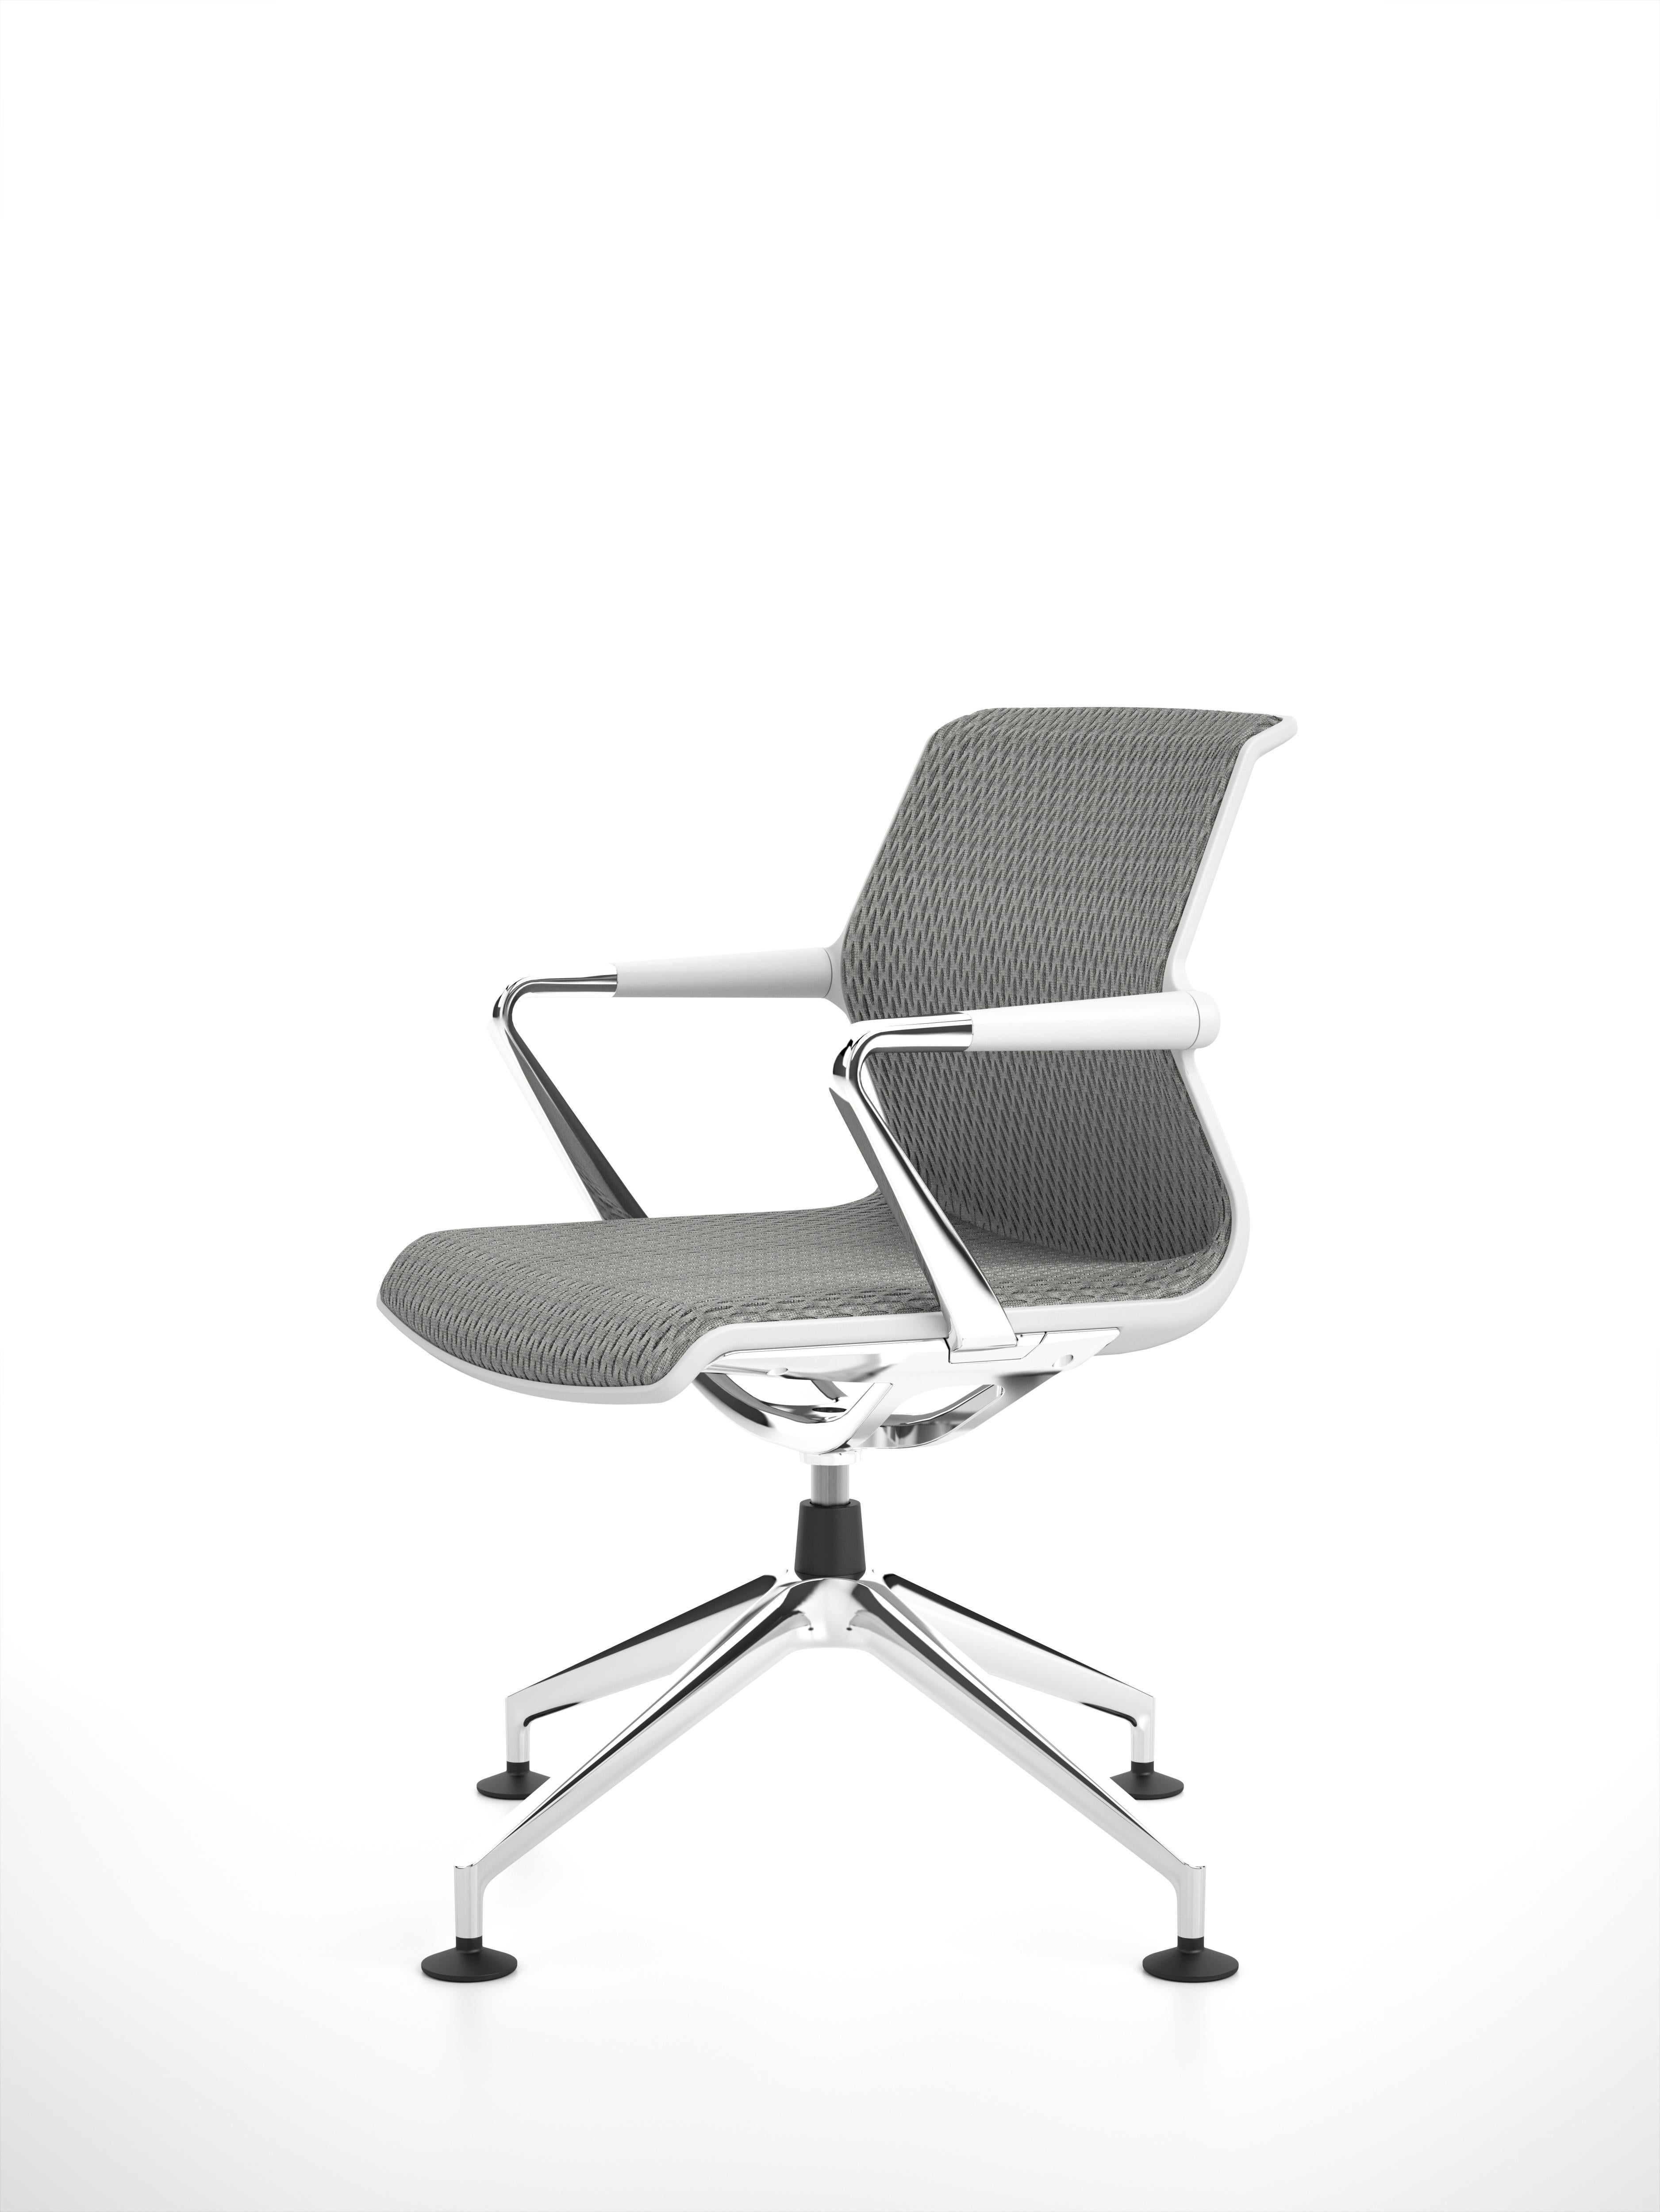 These items are currently only available in the United States.

The Unix chair by Antonio Citterio is available with an elegant four-star base. The swivel chair's vertical spring suspension and high-tech knit covers guarantee superb comfort even